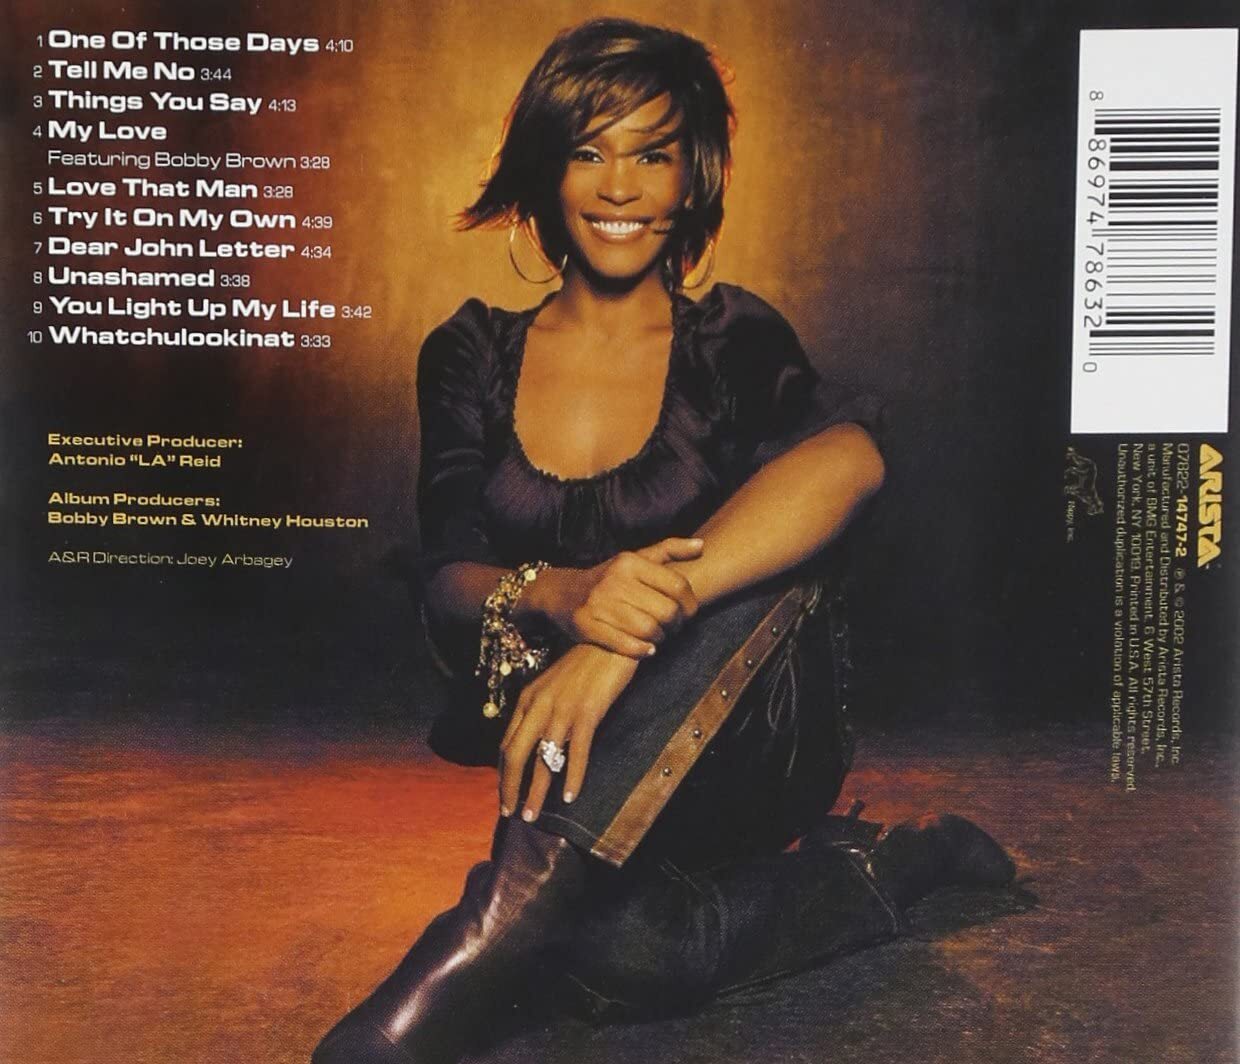 <p>With countless hits under her belt, it can be easy to forget that some of Whitney Houston’s strongest records were never released as singles at all. <a href="https://www.youtube.com/watch?v=7GIQ7UwZkuo">“Dear John Letter”</a> is a prime example of this—although the track was never released to radio, the song is a great illustration of Whitney’s talent for hiding sad, reflective <a href="https://genius.com/Whitney-houston-dear-john-letter-lyrics">lyrics</a> behind a poppy, fun melody.</p>